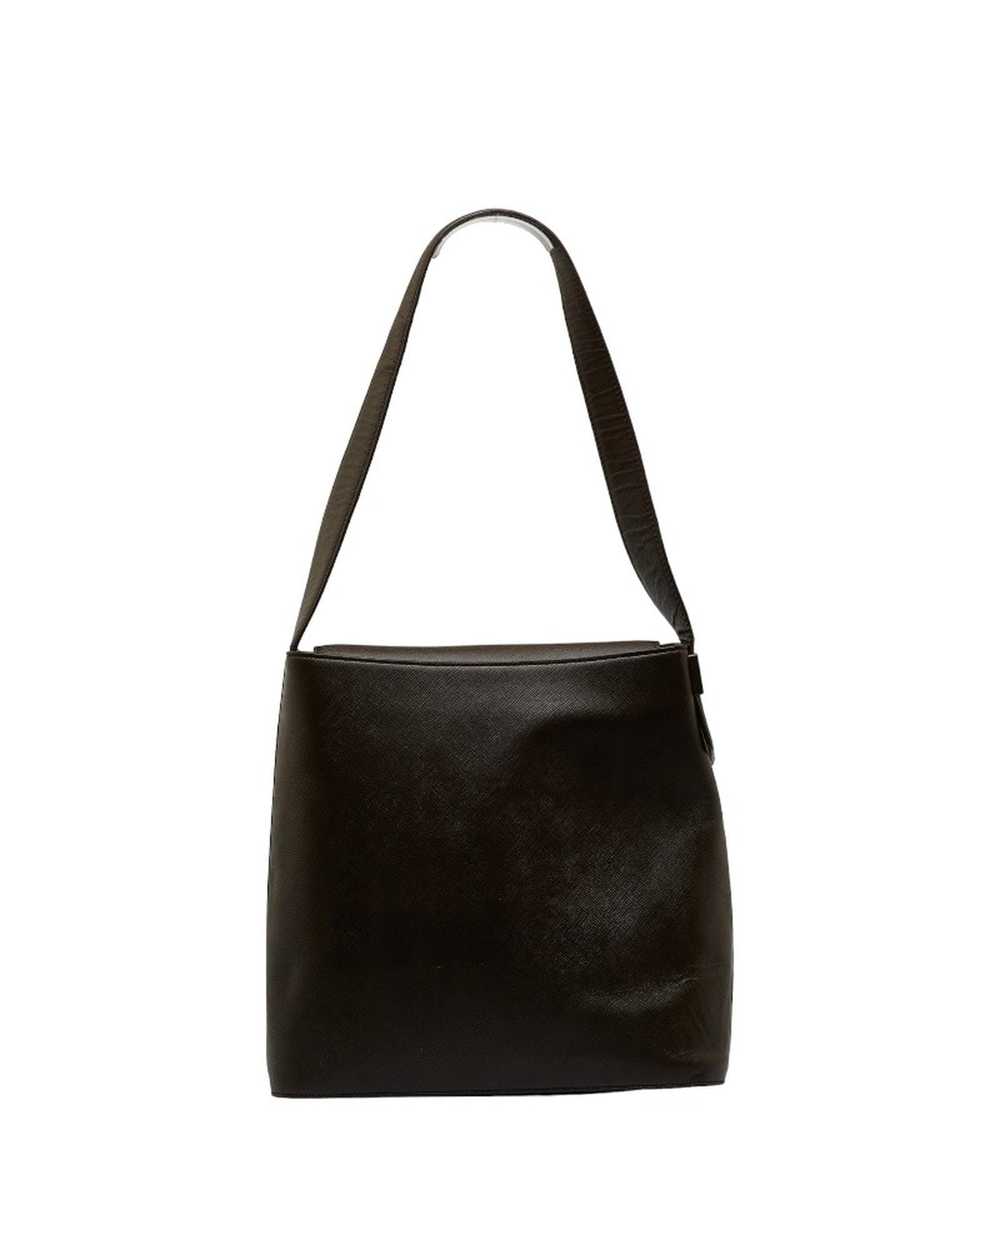 Burberry Brown Leather Shoulder Bag in AB Conditi… - image 3